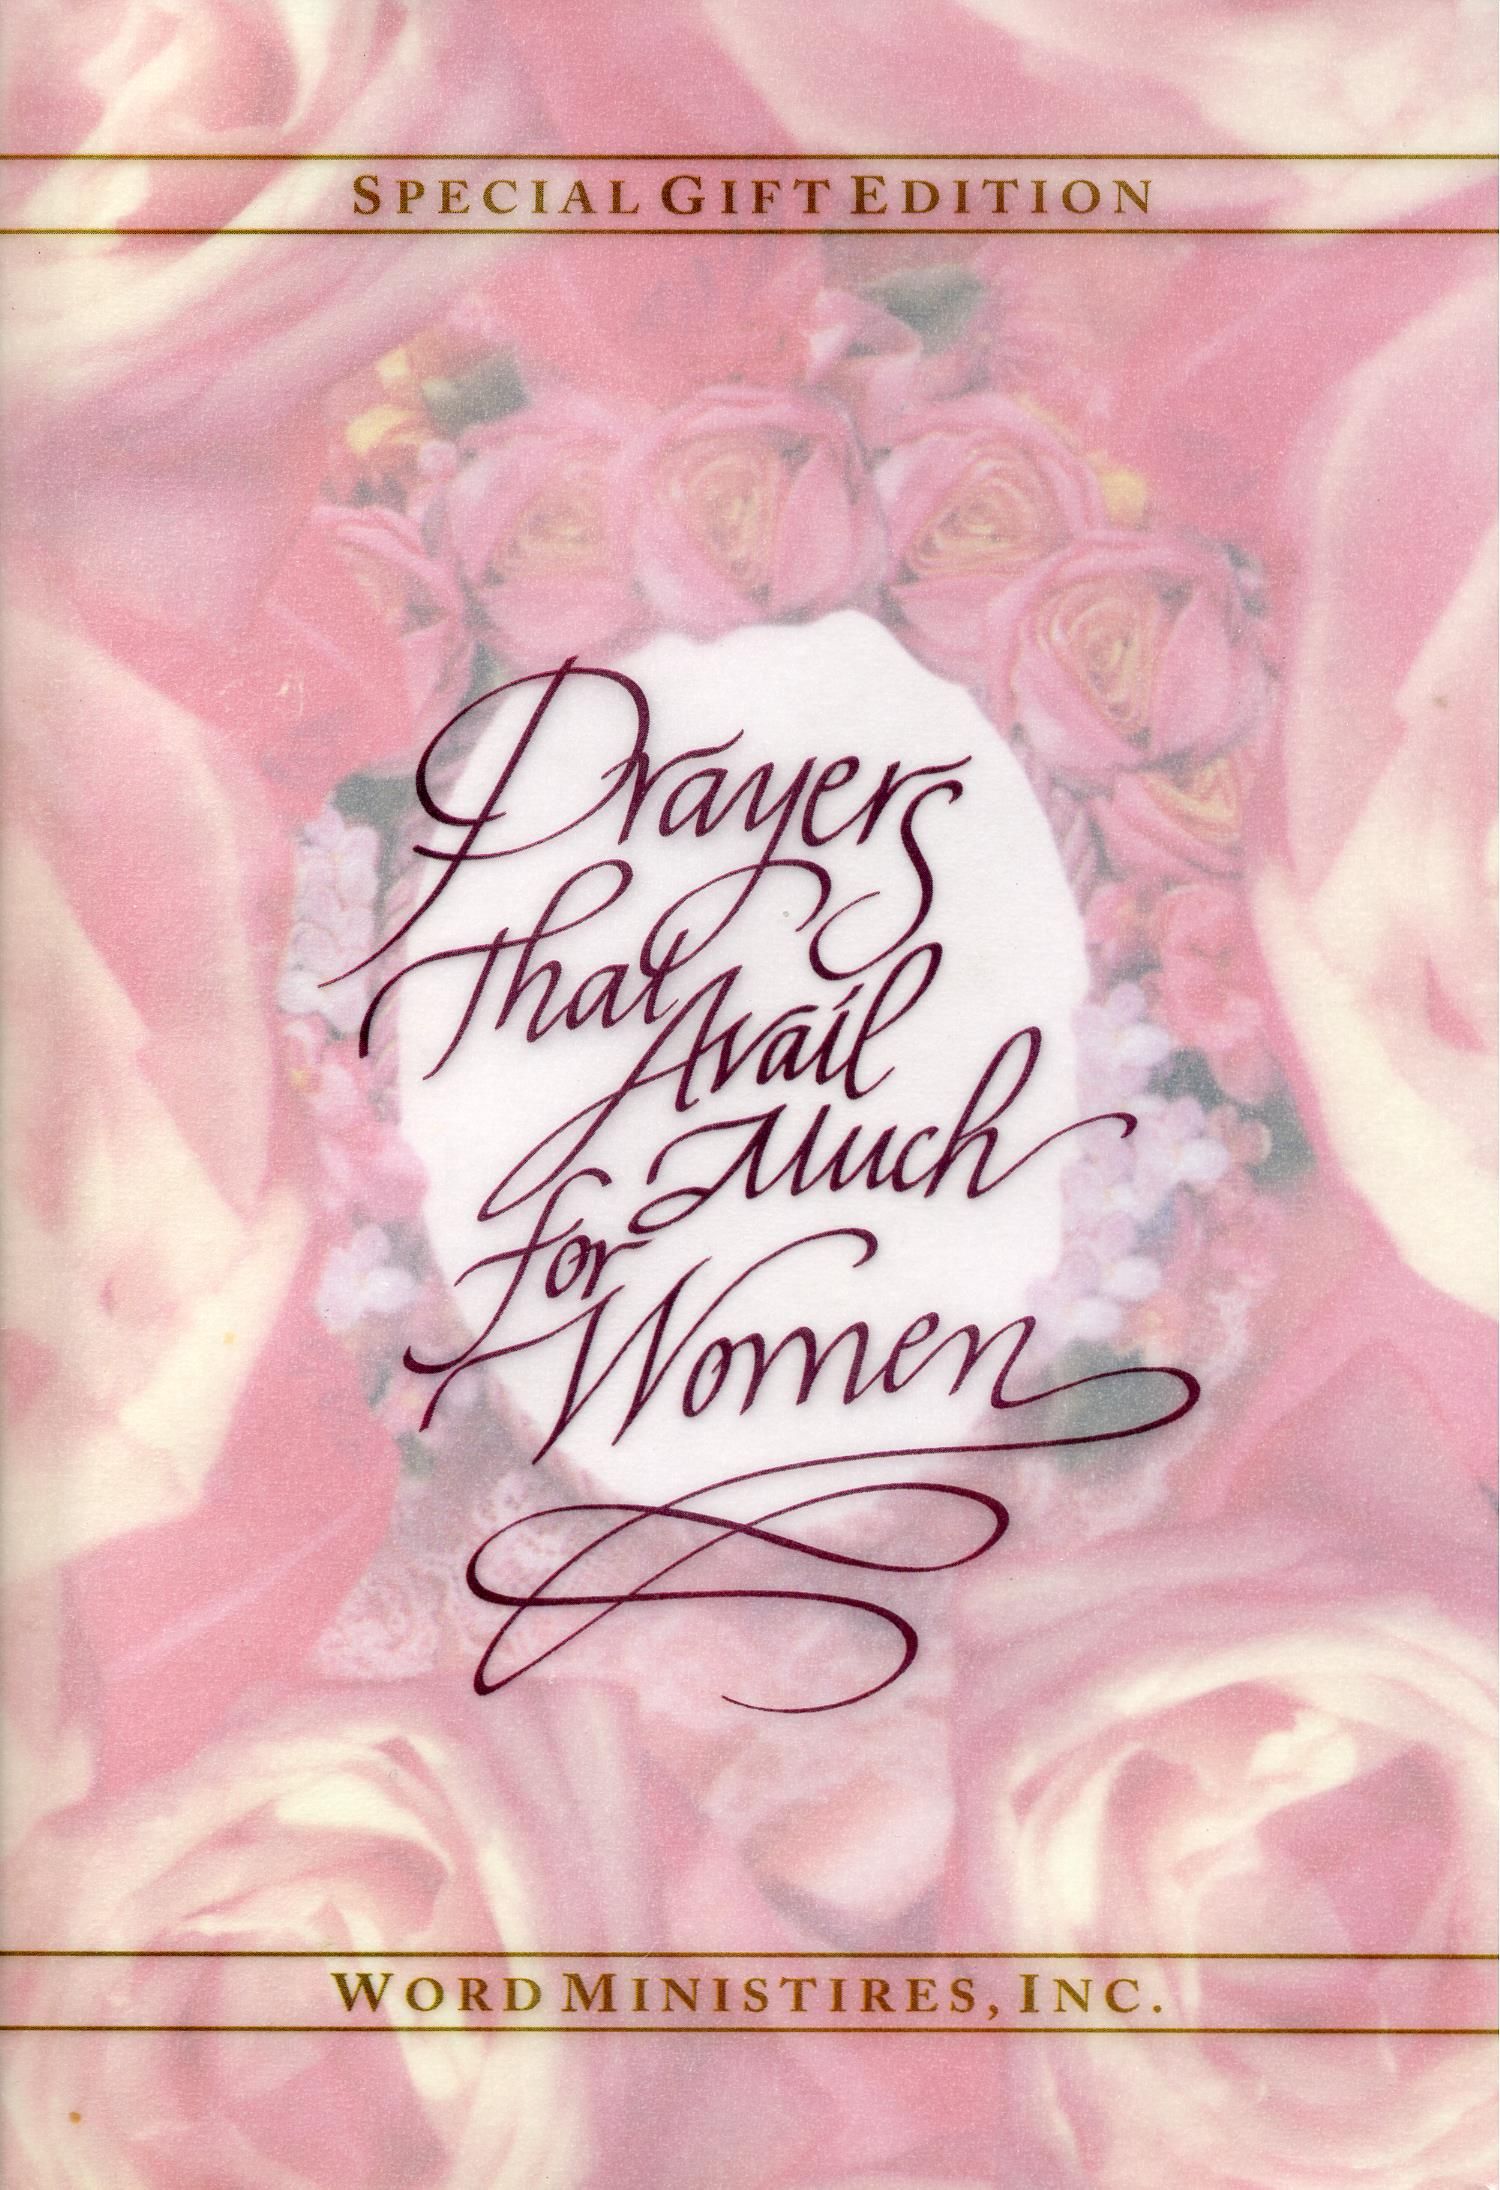 Word Ministries: Prayers that avail much for women